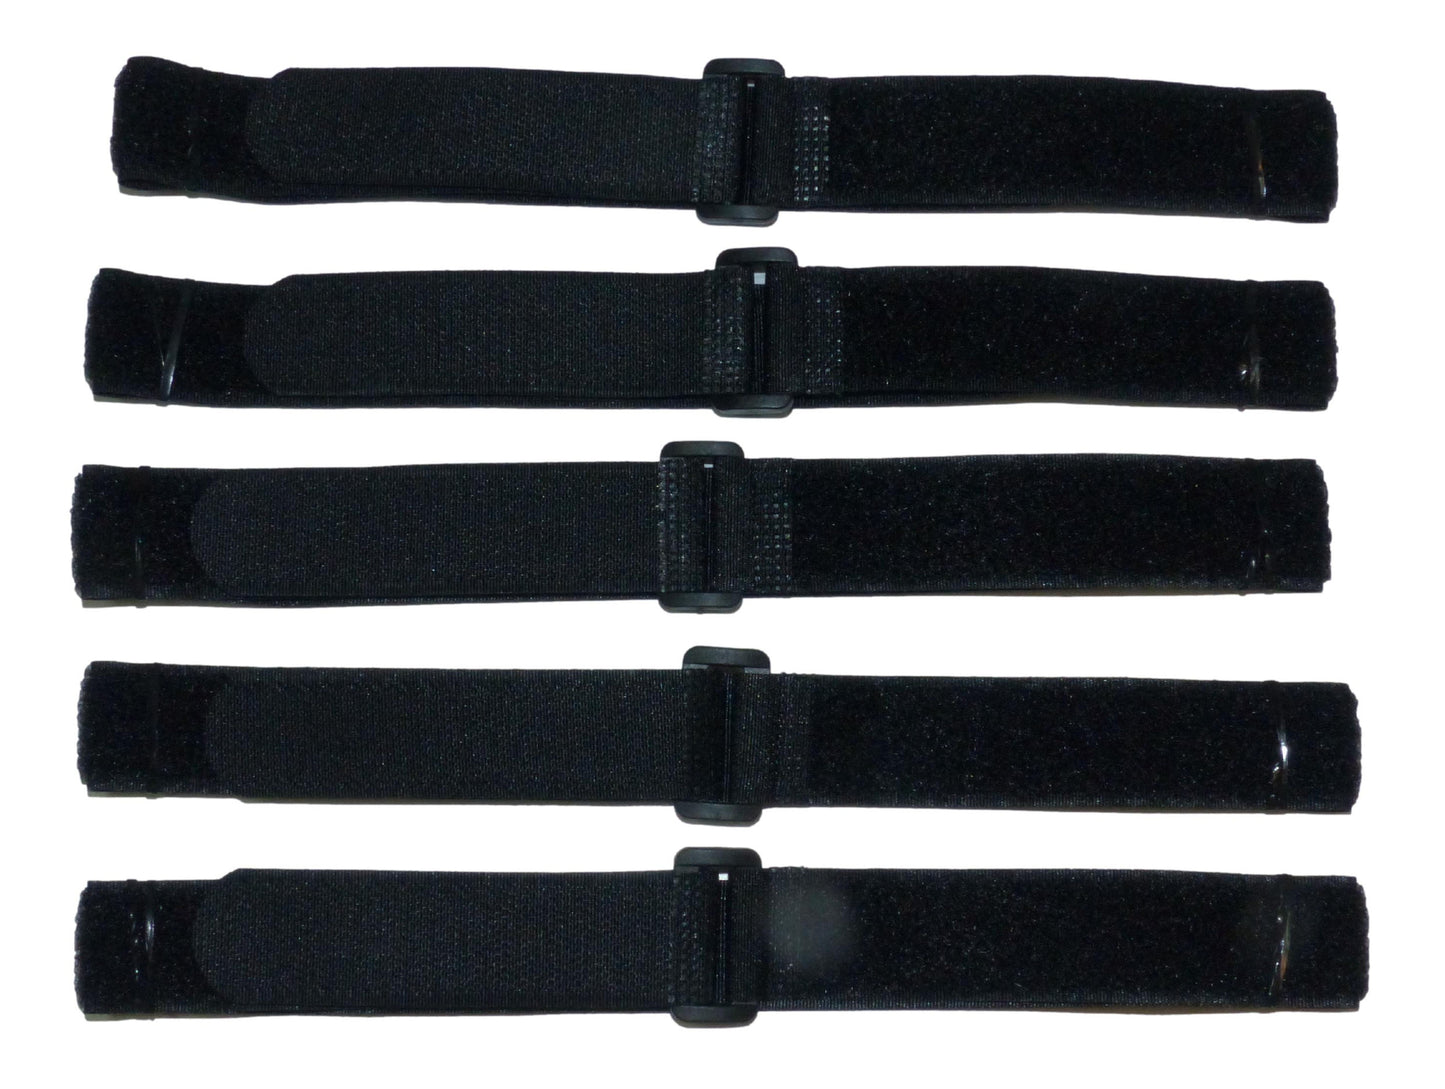 Benristraps 25mm Hook and Loop Cinch Straps (Pack of 5)